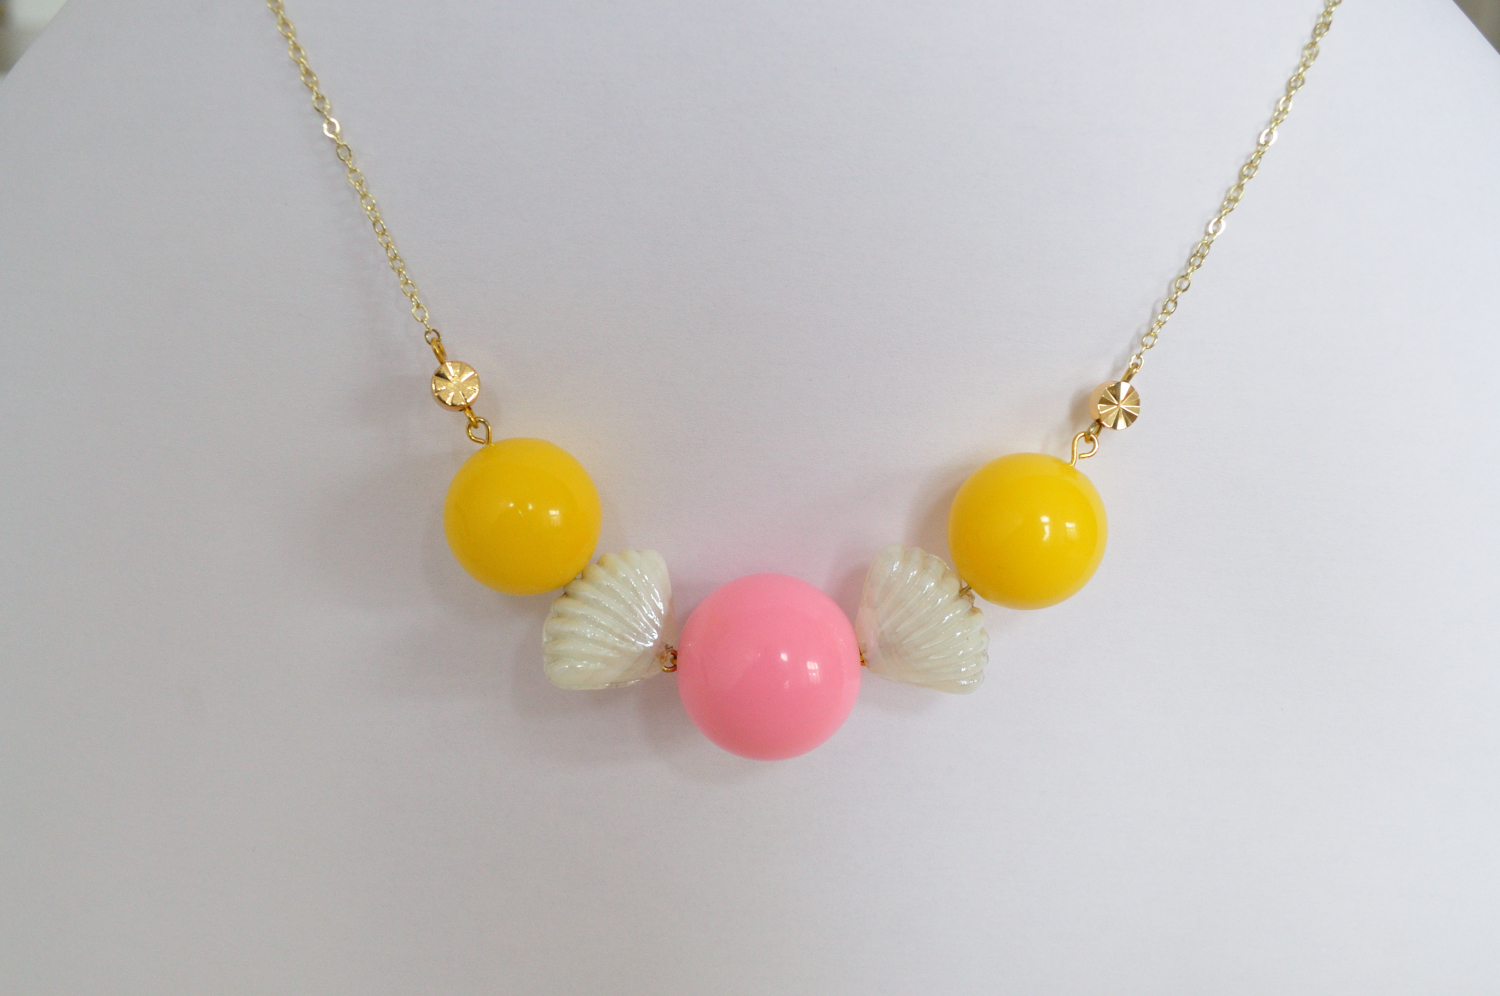 fine, gold-plated necklace with gold-plated spacers, chunky acrylic beads in pink and yellow and white shell glass beads